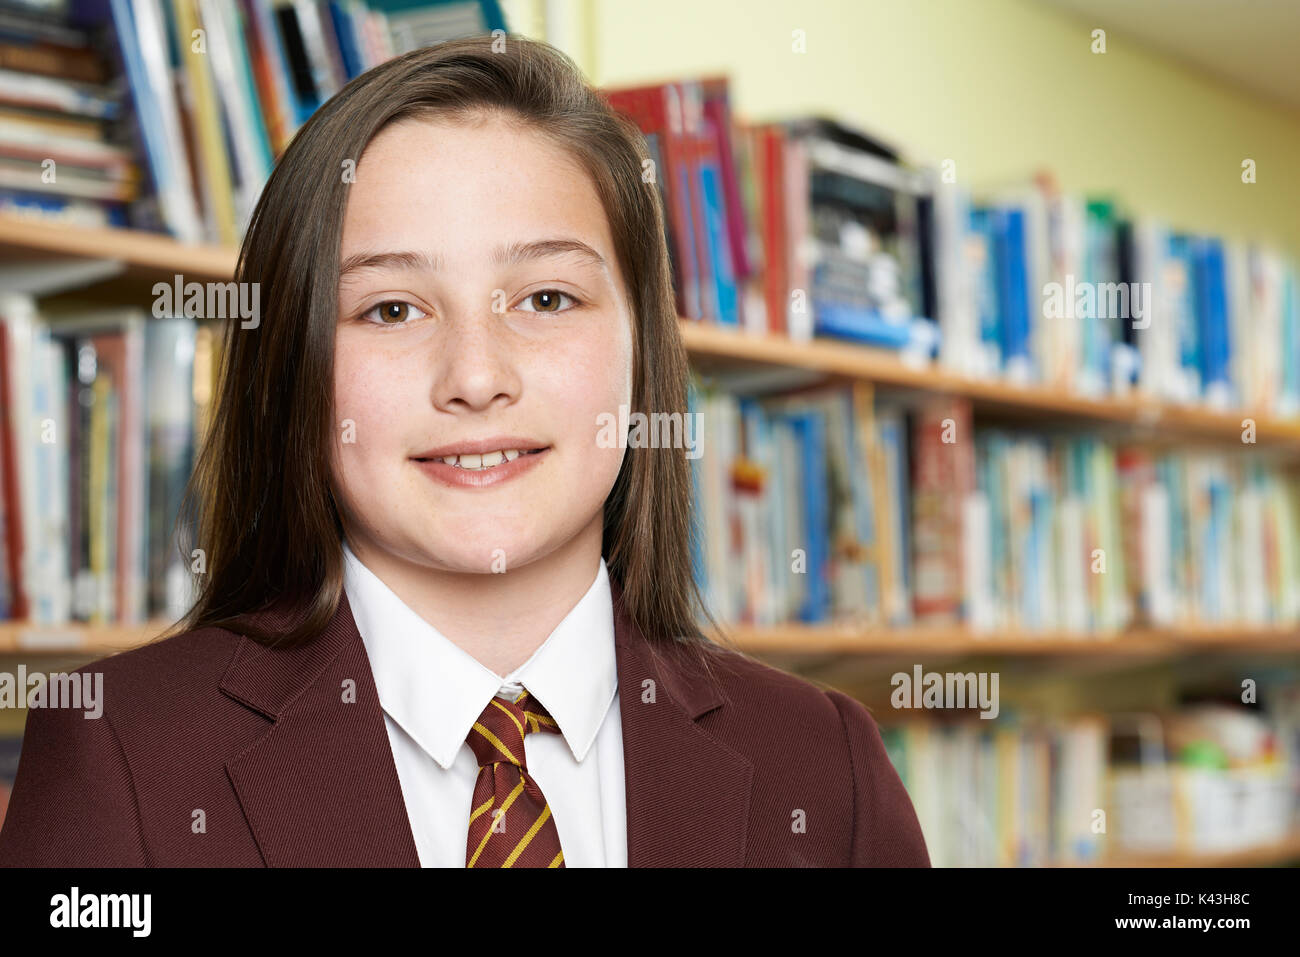 Portrait of Girl Wearing School Uniform In Library Banque D'Images